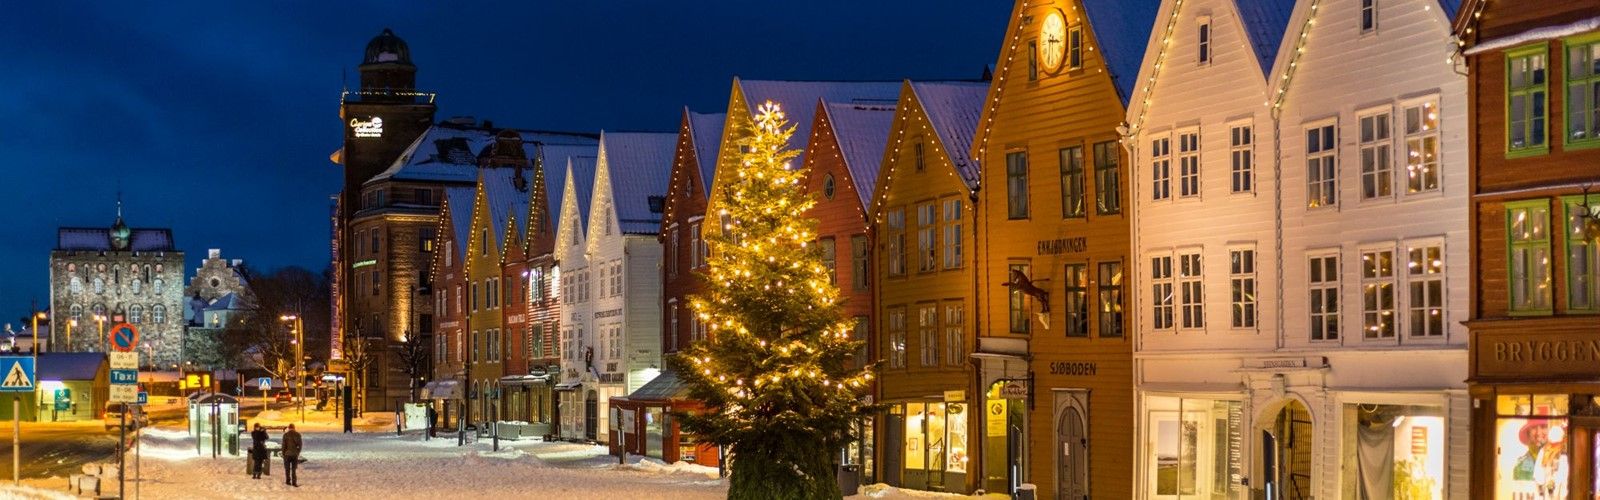 Find PHP developers in Bergen for your next project